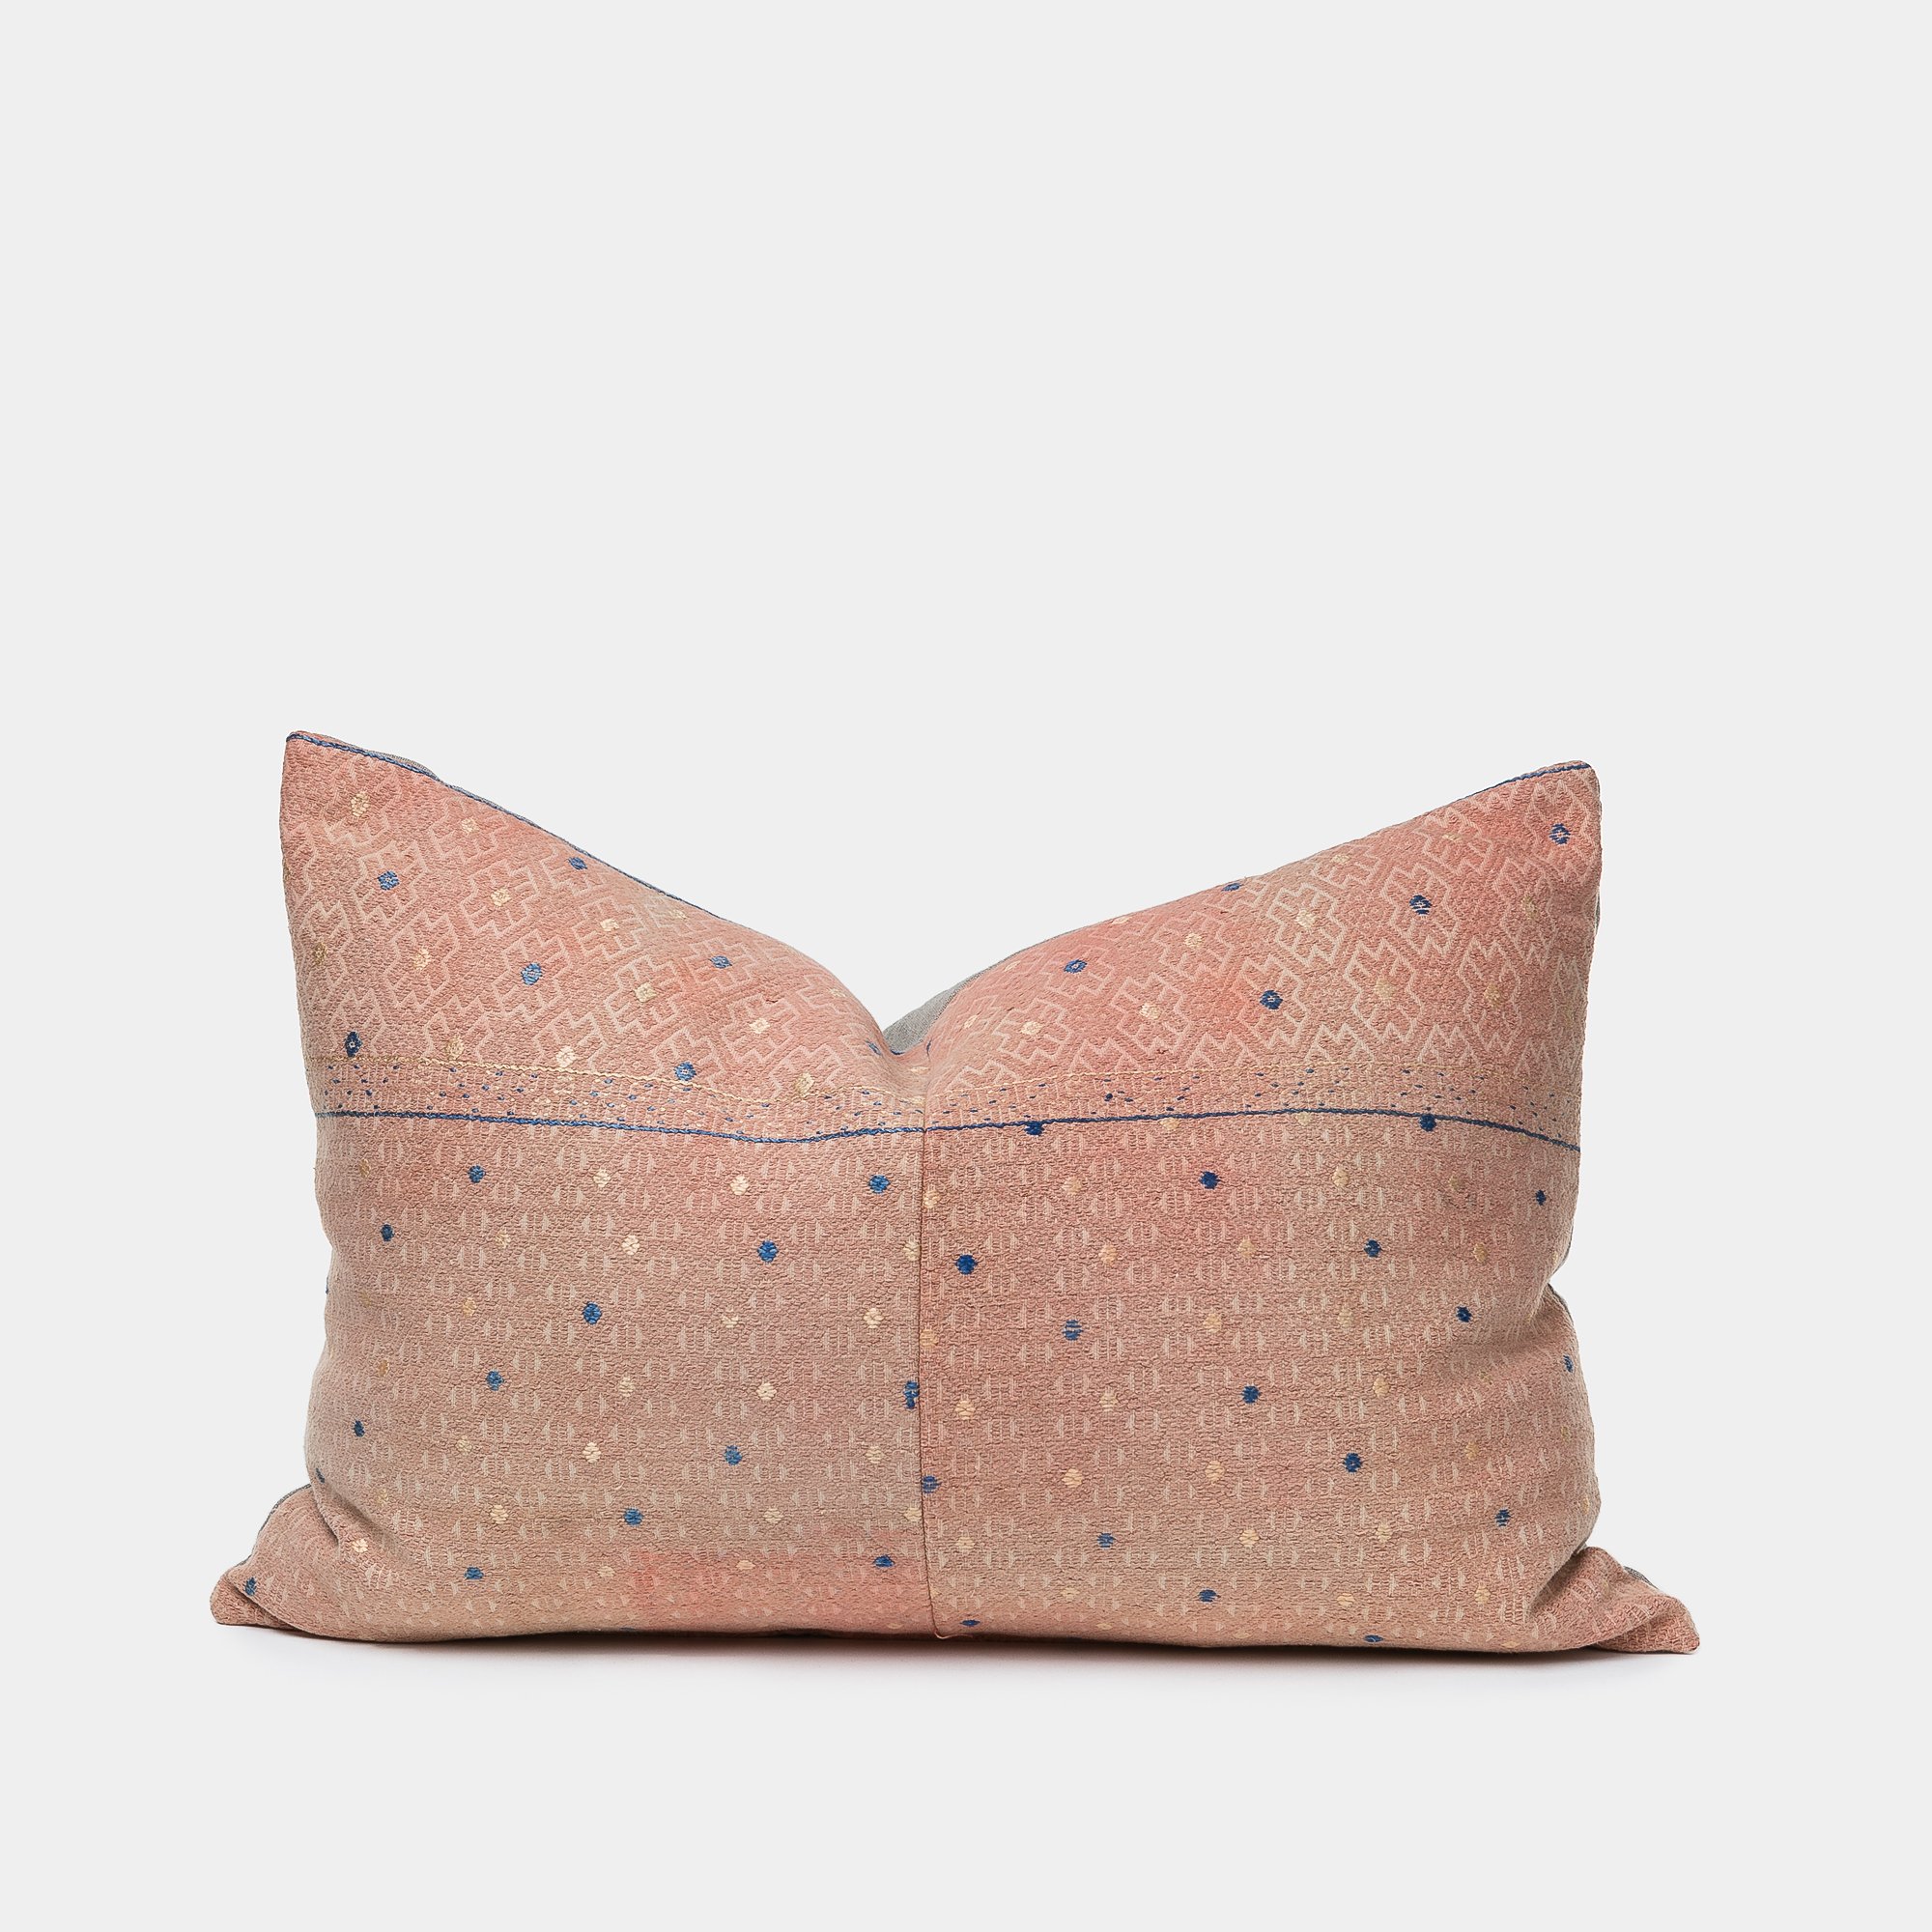 ALL-SORTS-OF-SHOPPE-EMILY-PILLOW